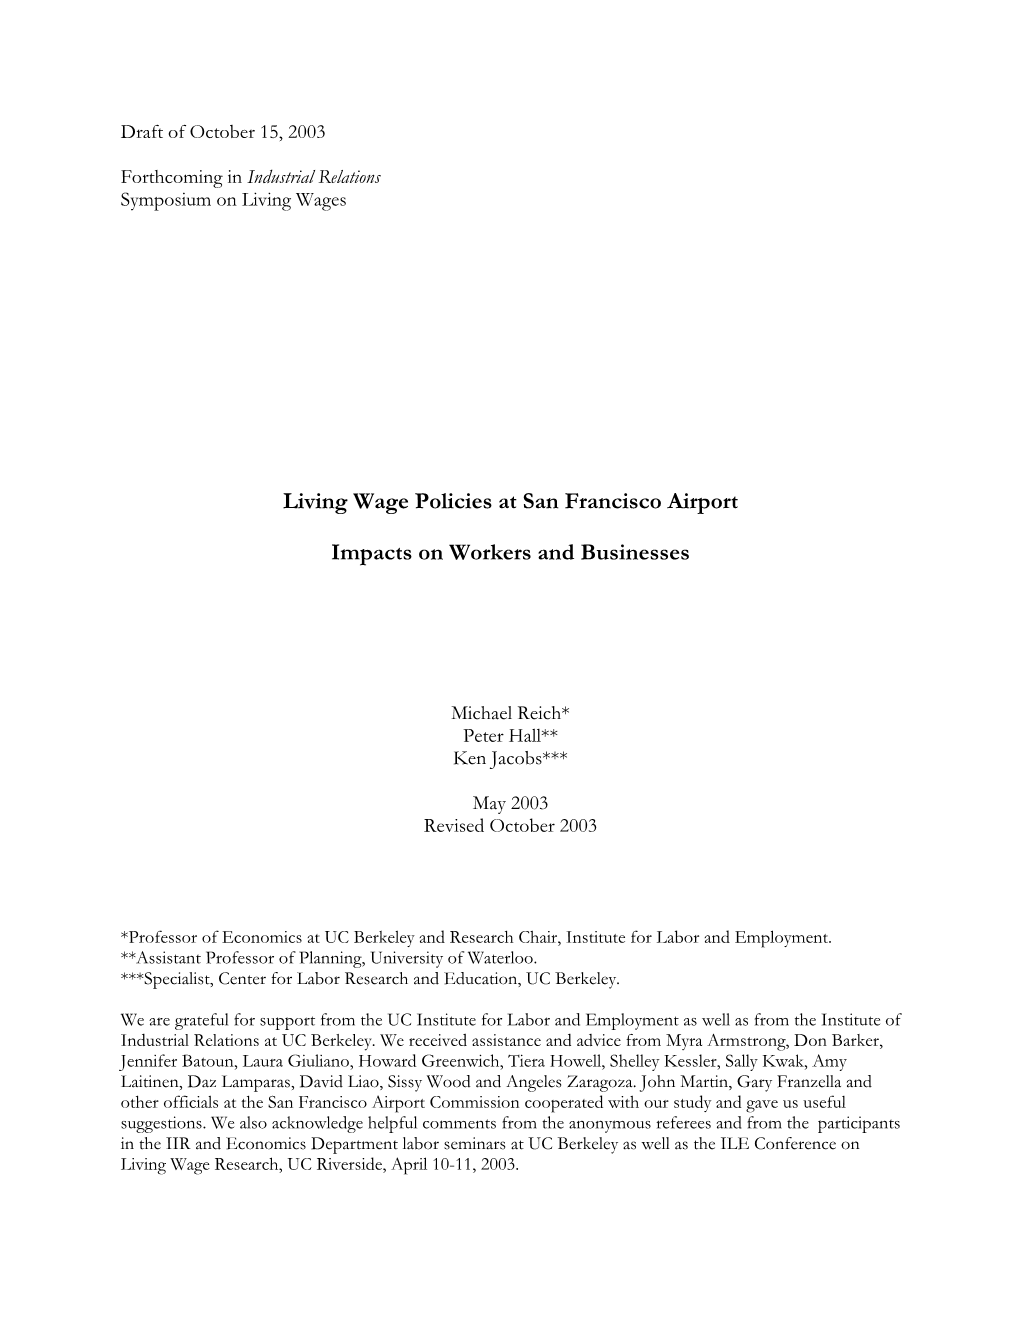 Living Wage Policies at San Francisco Airport:: Impacts on Workers And